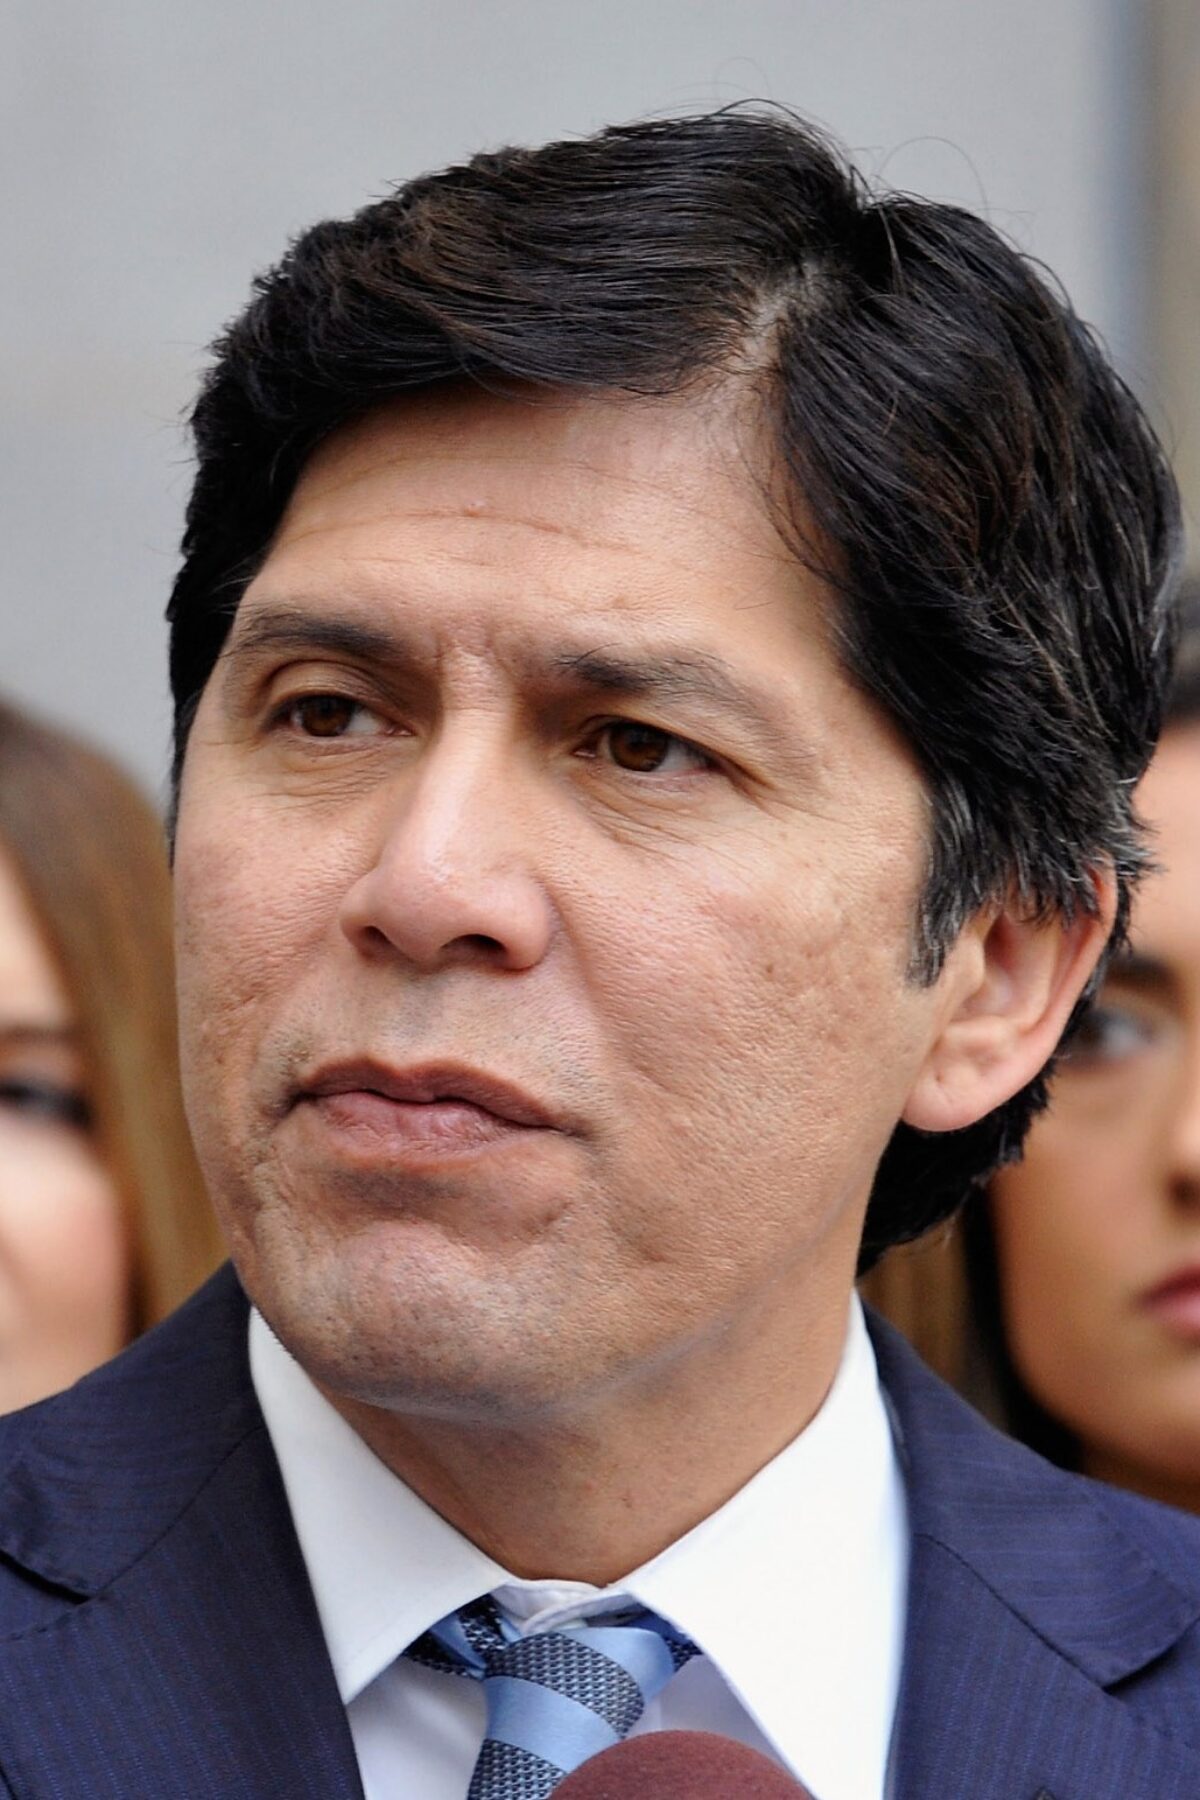 LOS ANGELES, CA - NOVEMBER 20: California State Senate president pro tempore Kevin de Leon speaks at a press conference held by Social Compassion In Legislation to denounce President Trump's plan to reverse endangered species protections on November 20, 2017 in Los Angeles, California. (Photo by Michael Tullberg/Getty Images)